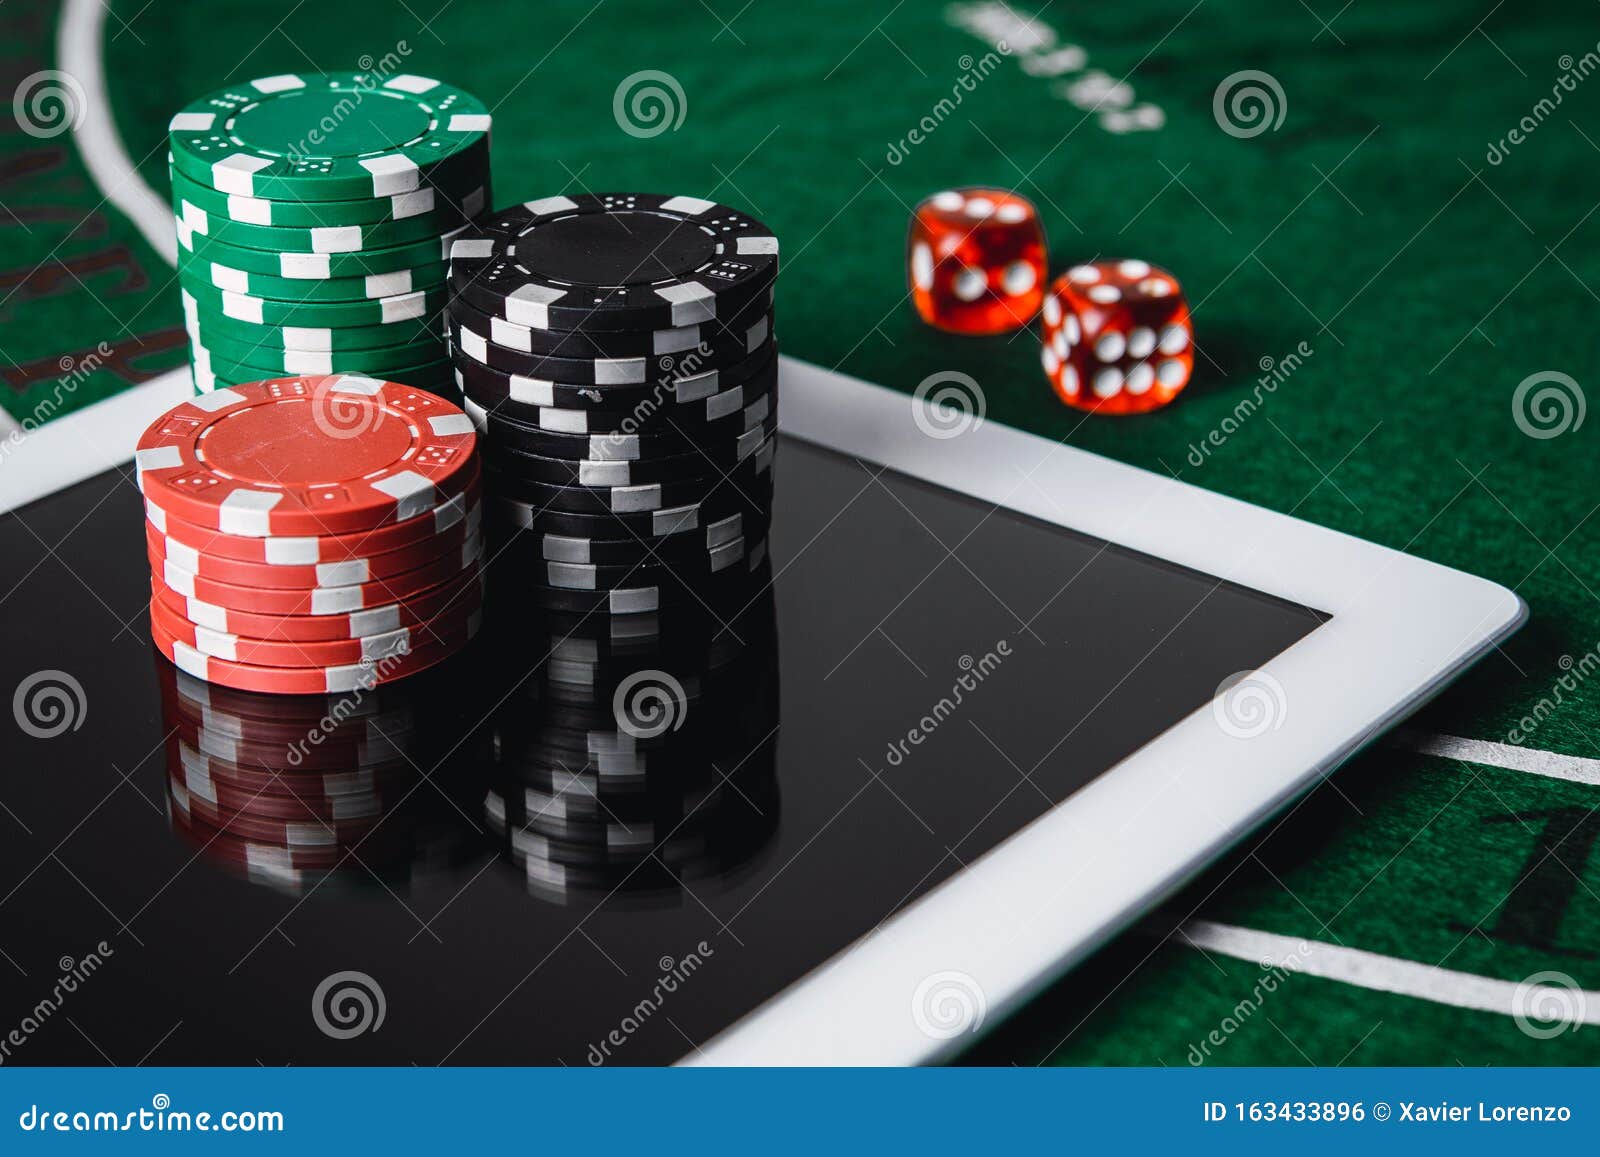 Three Quick Ways To Learn poker online